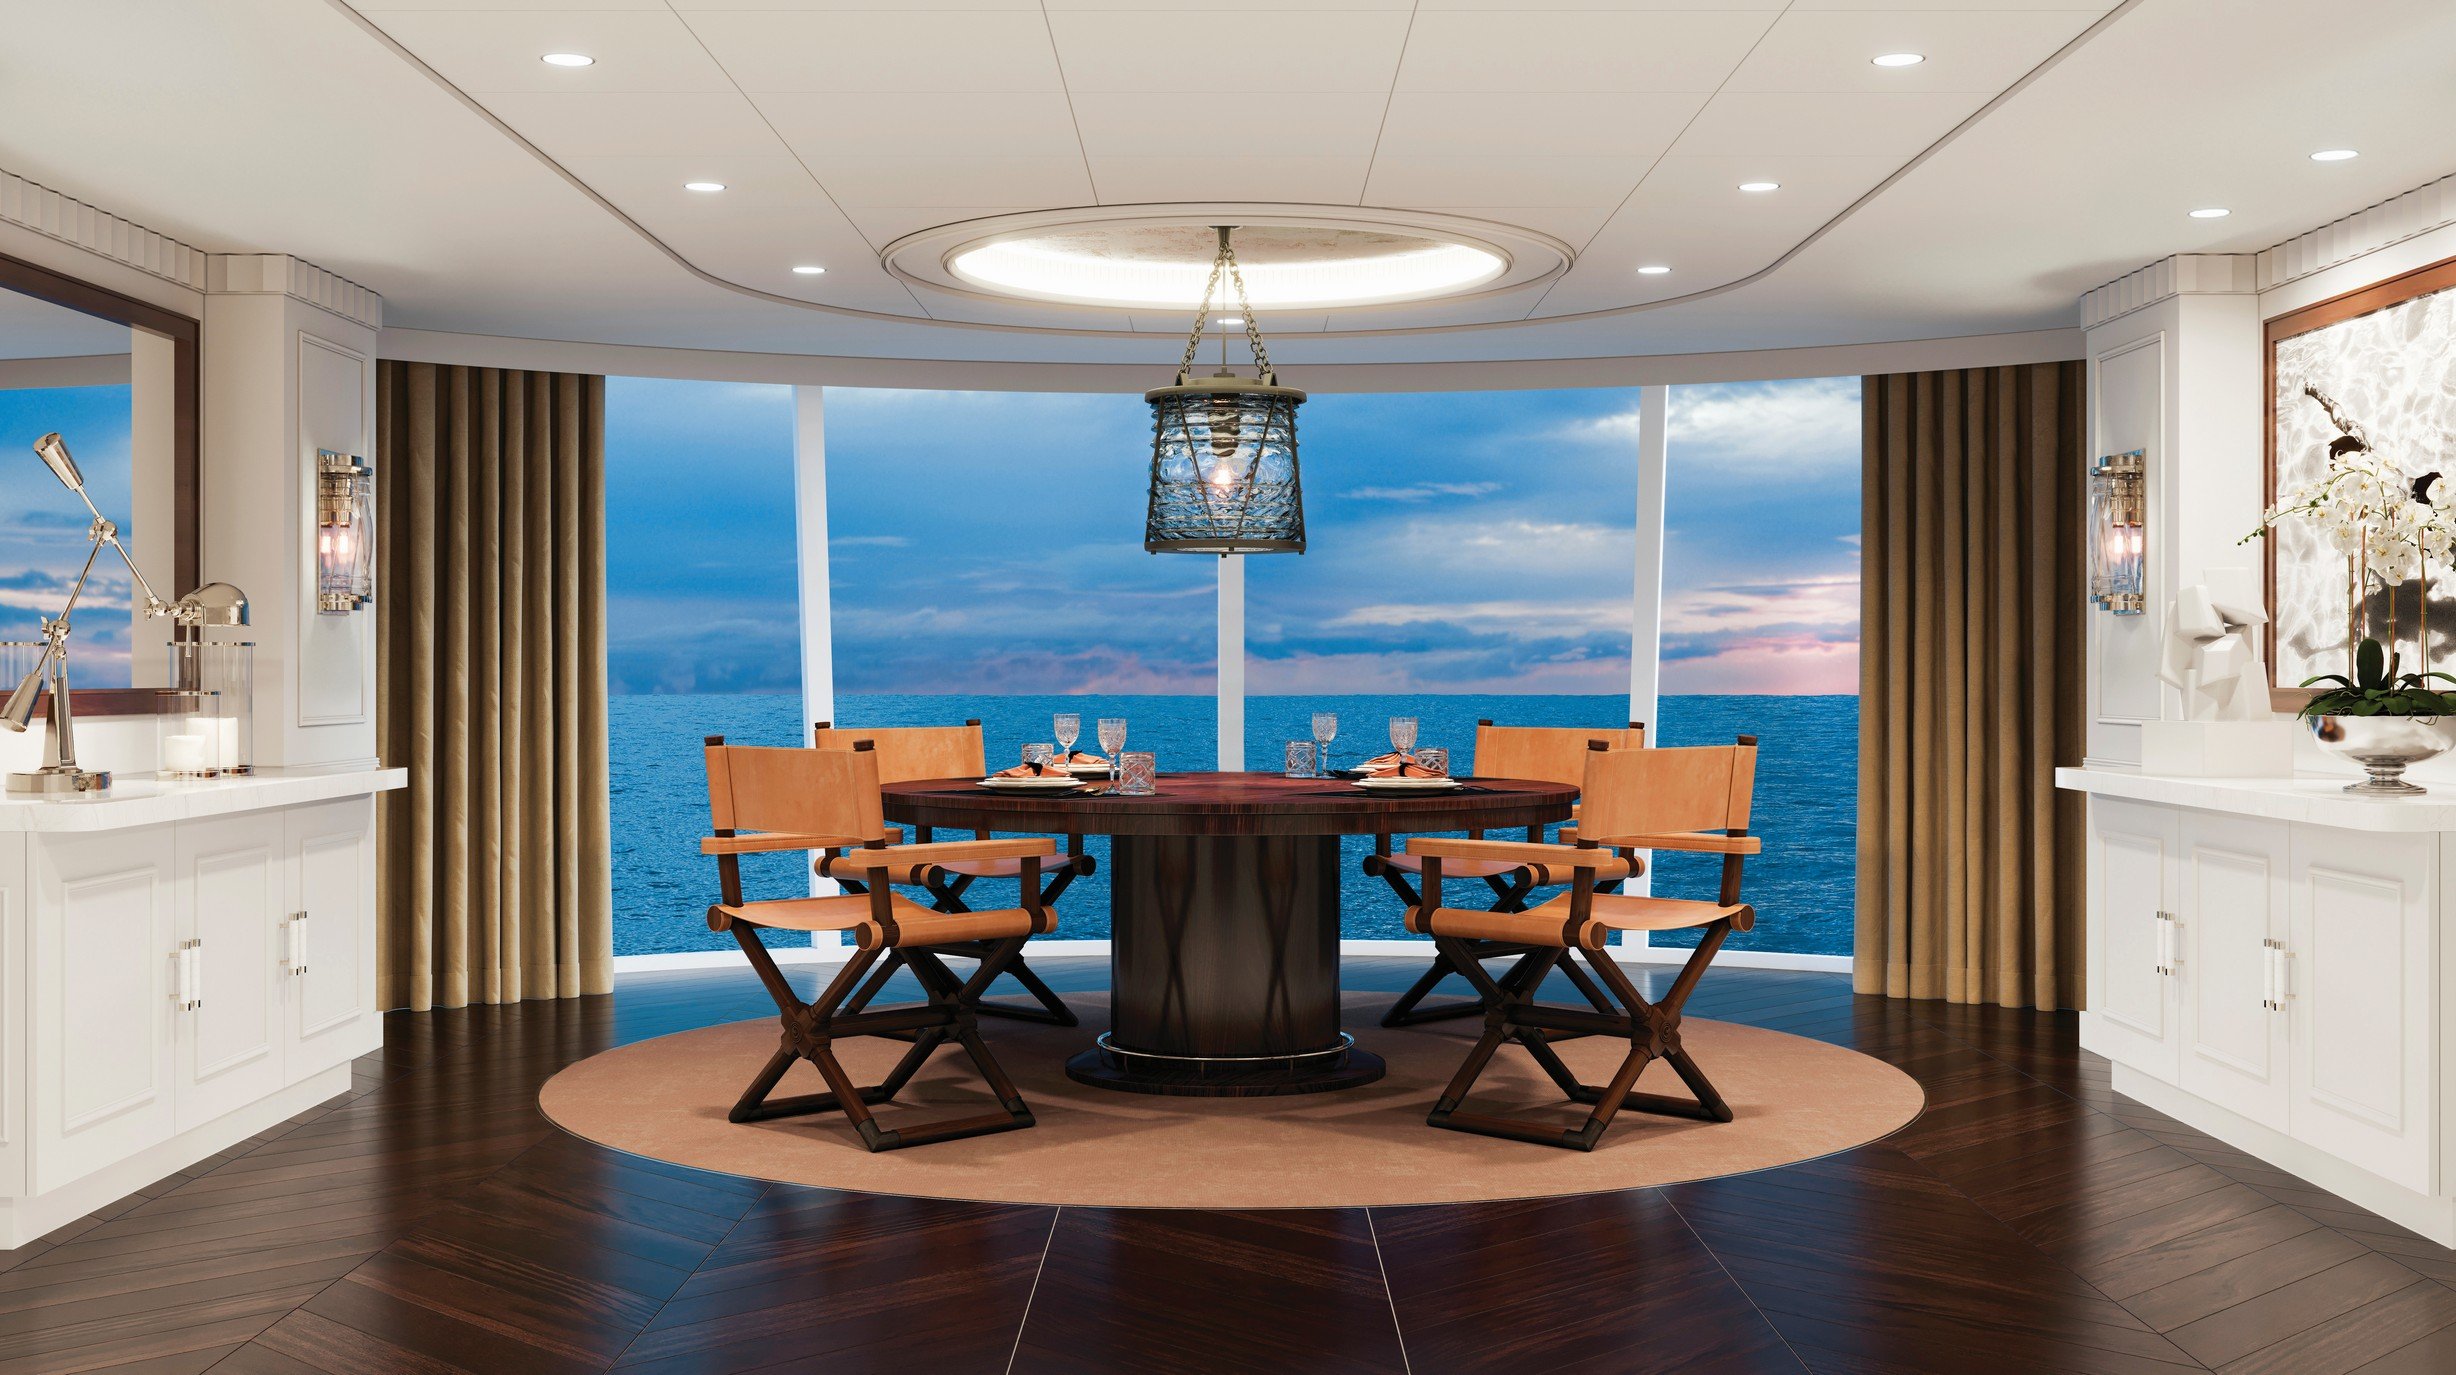 OC_A_VISTA_OWNERS SUITE_DINING_RENDERING_2022-11-14_13-49-39